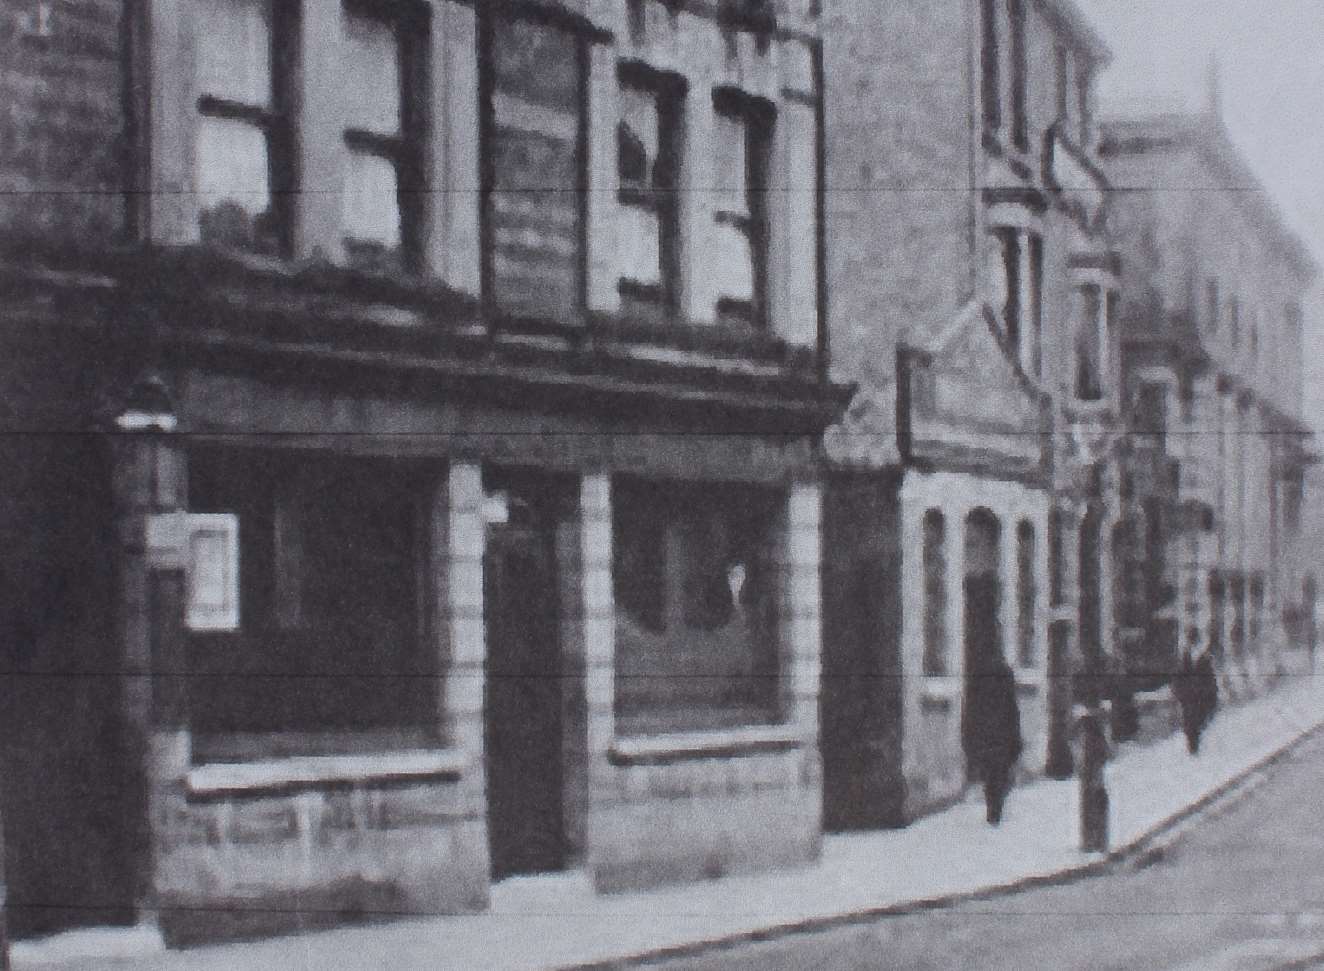 How the Criterion Theatre looked before it was bombed